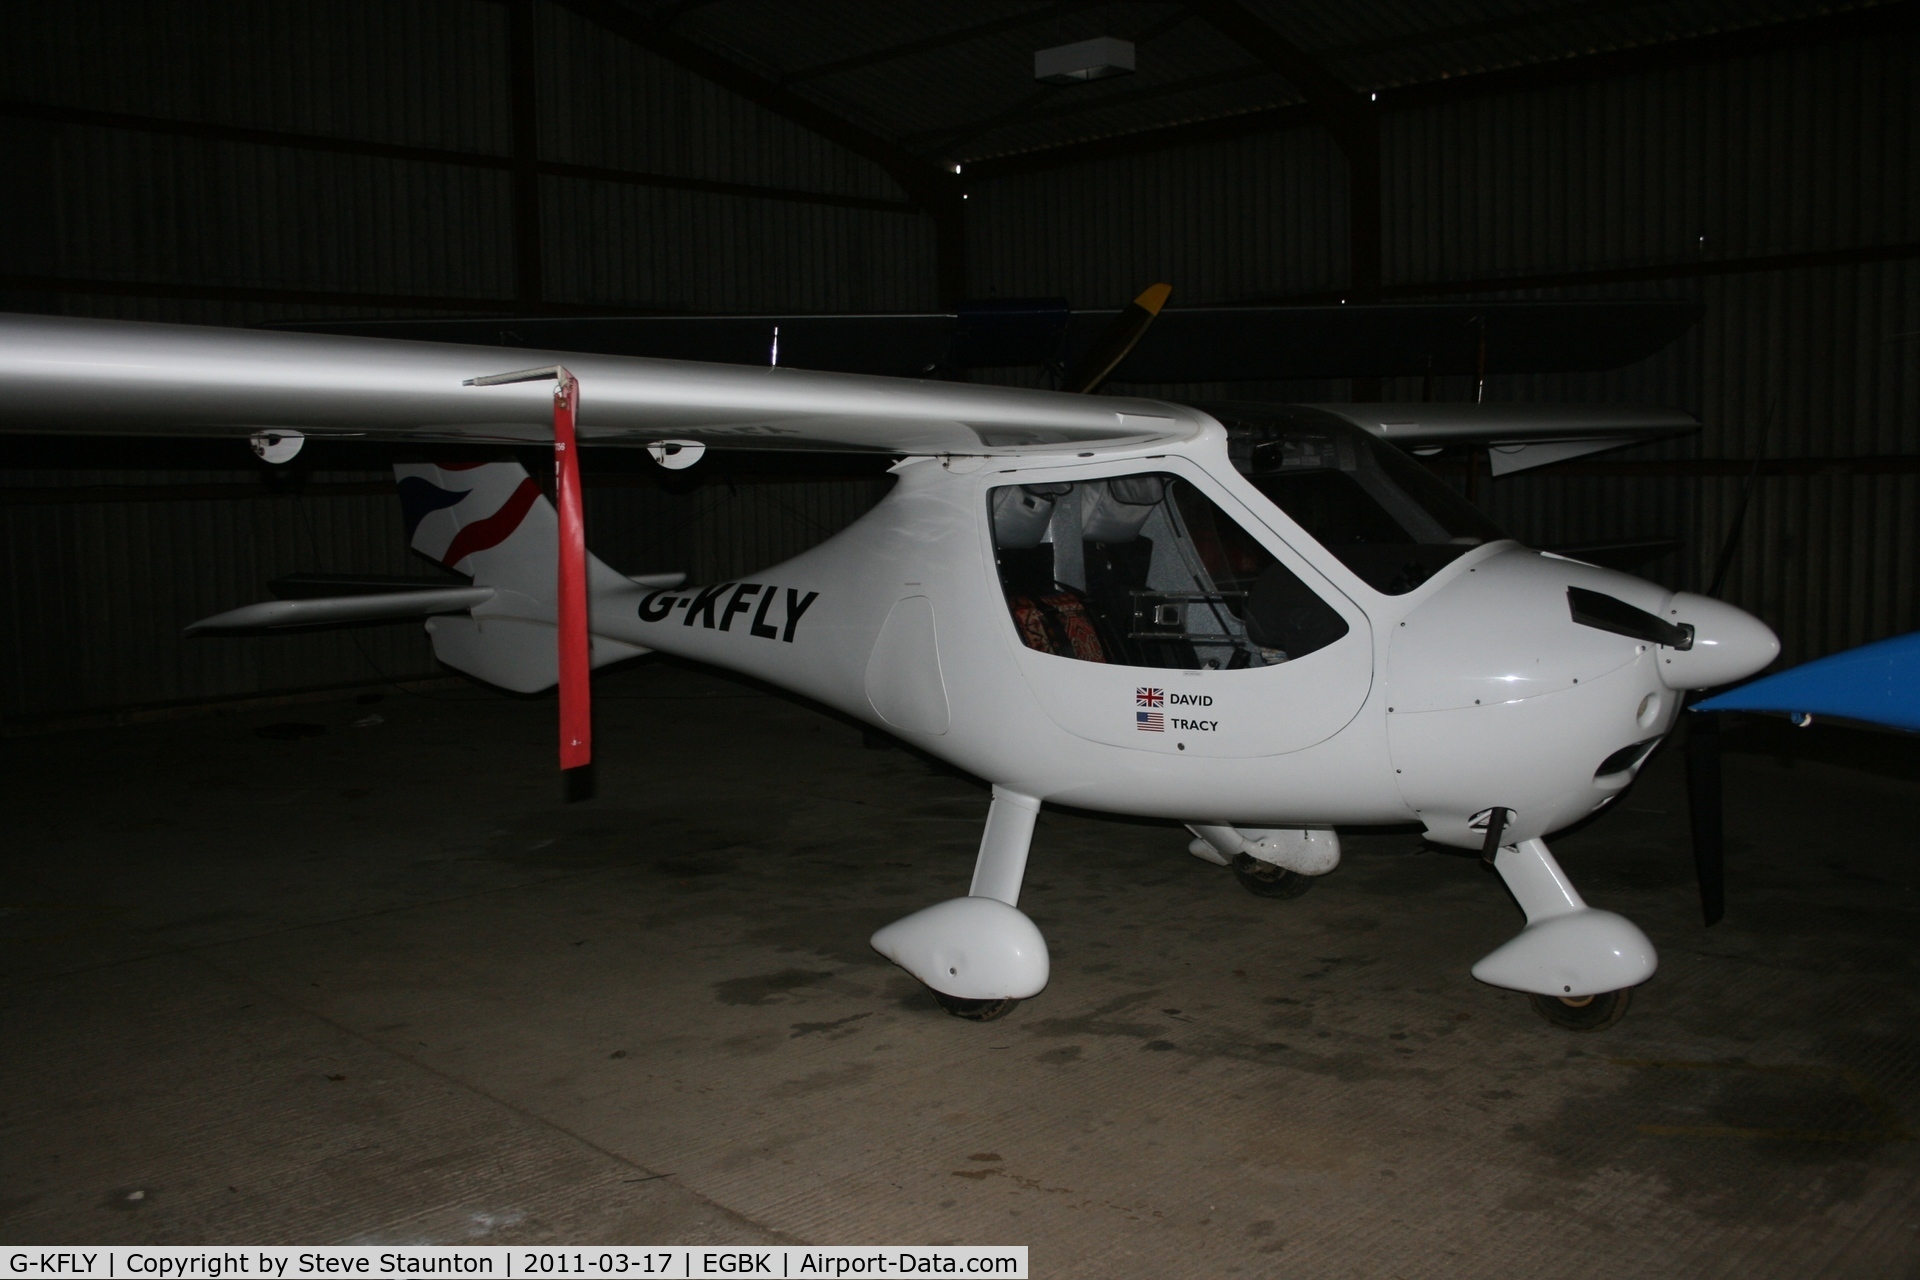 G-KFLY, 2007 Flight Design CTSW C/N 8244, Taken at Sywell Airfield March 2011